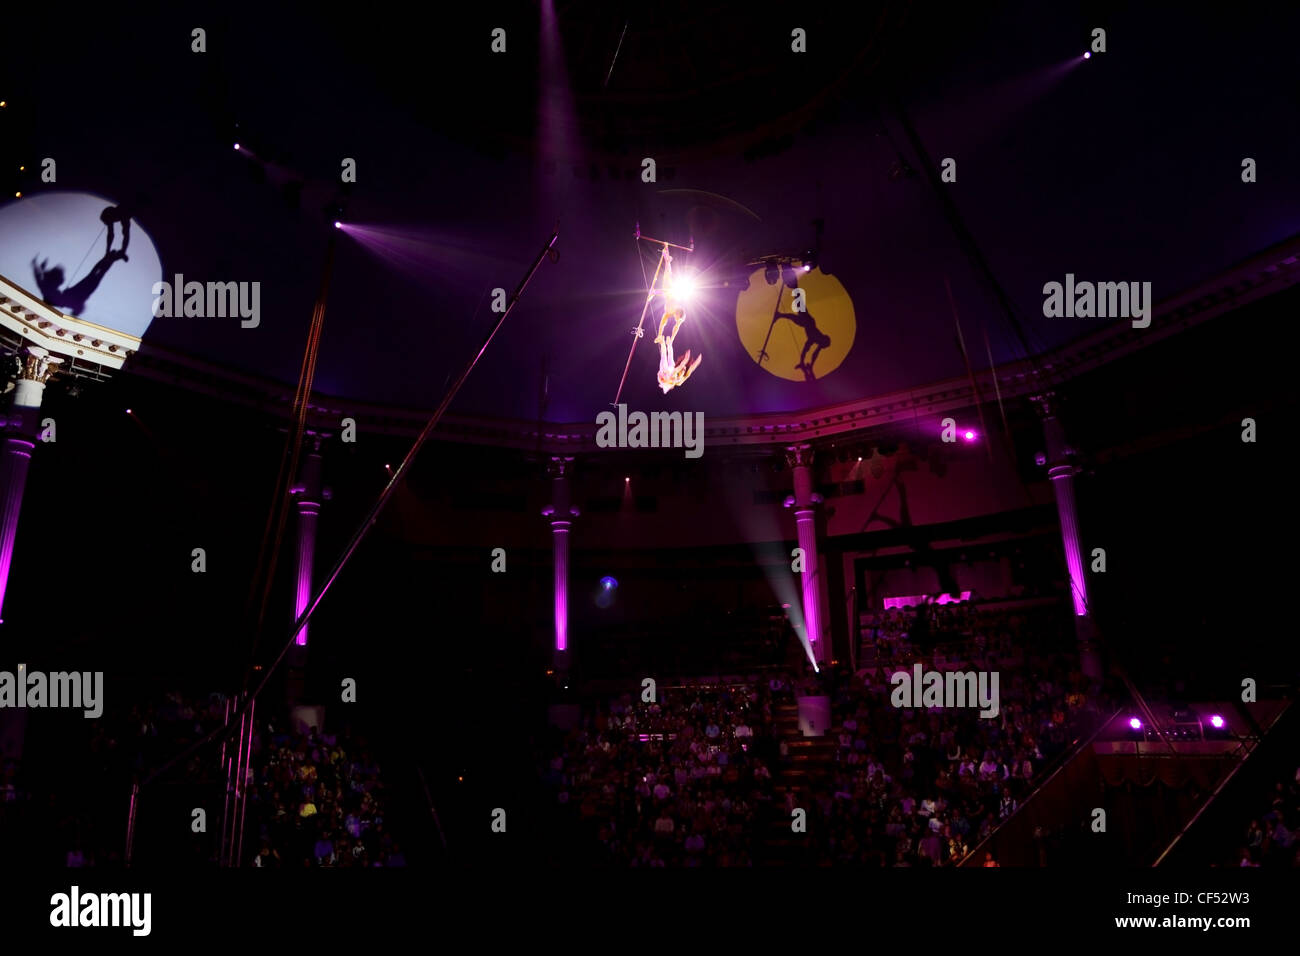 circus performance with two trapeze gymnasts purple light Stock Photo